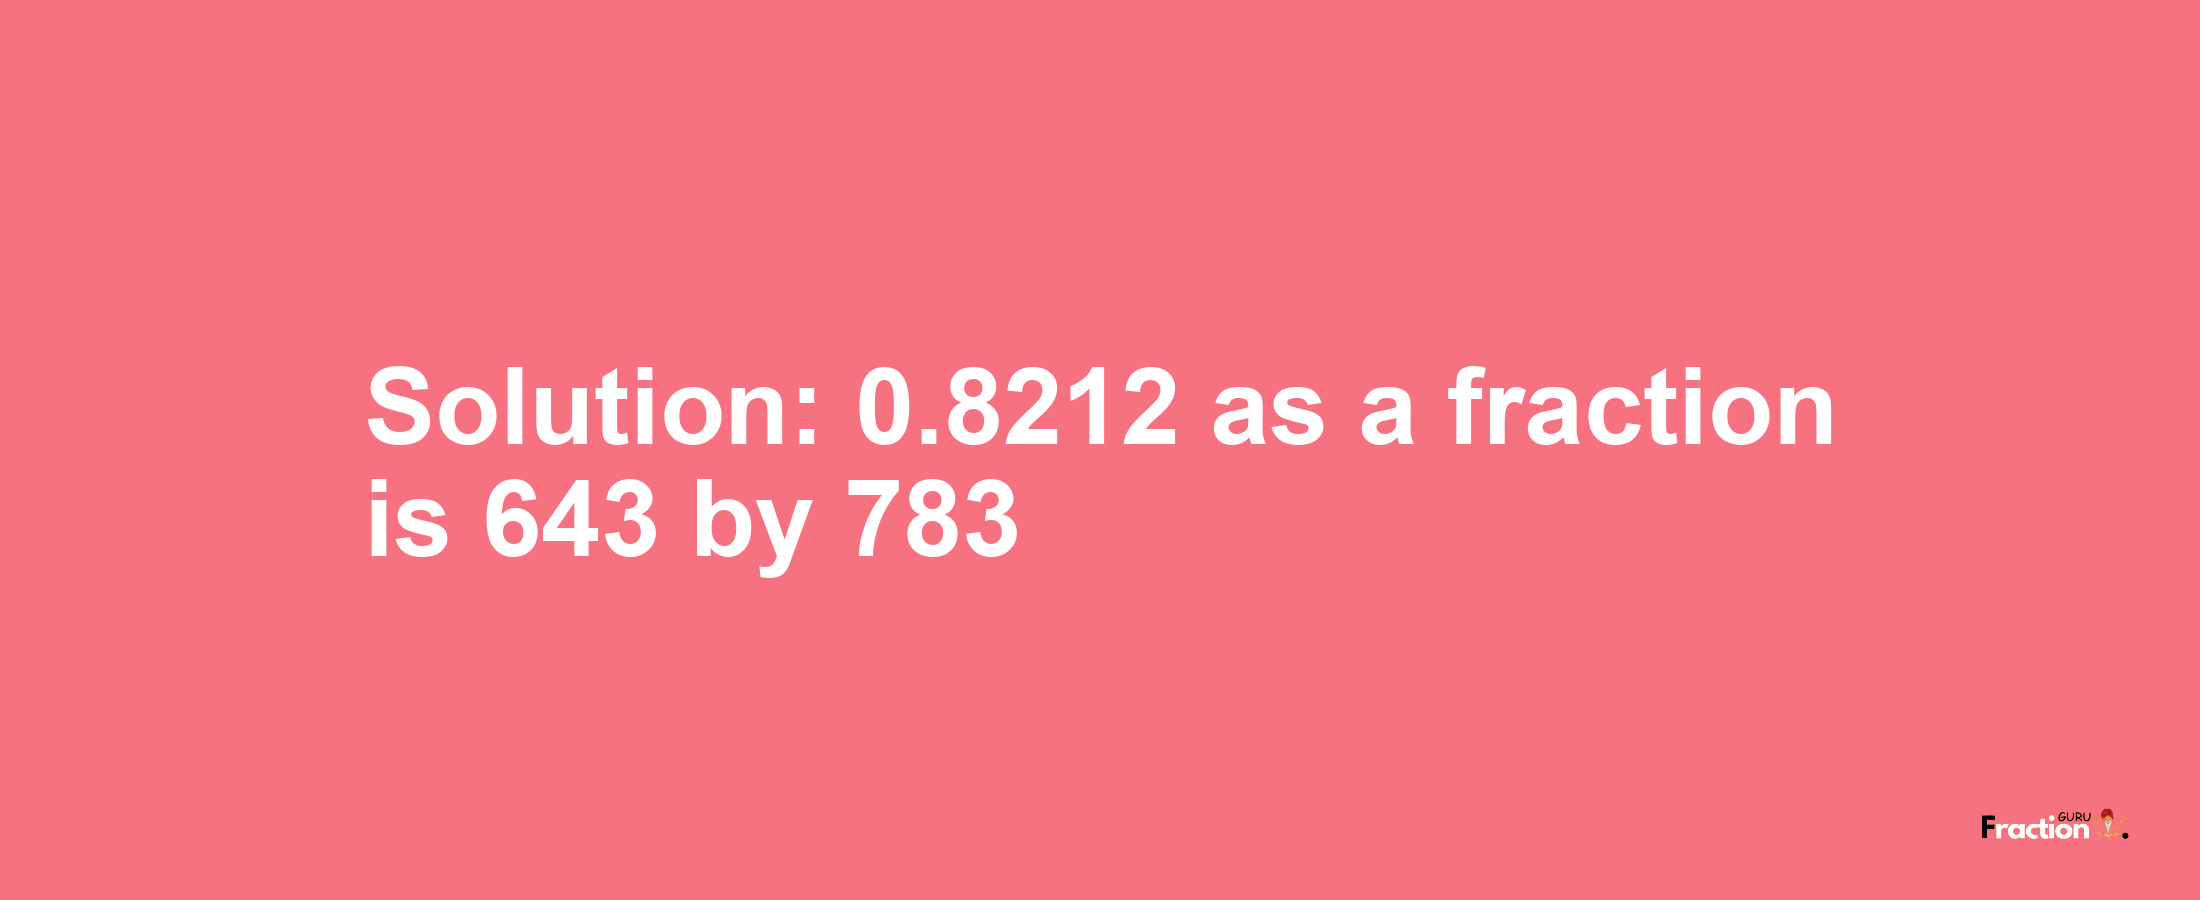 Solution:0.8212 as a fraction is 643/783